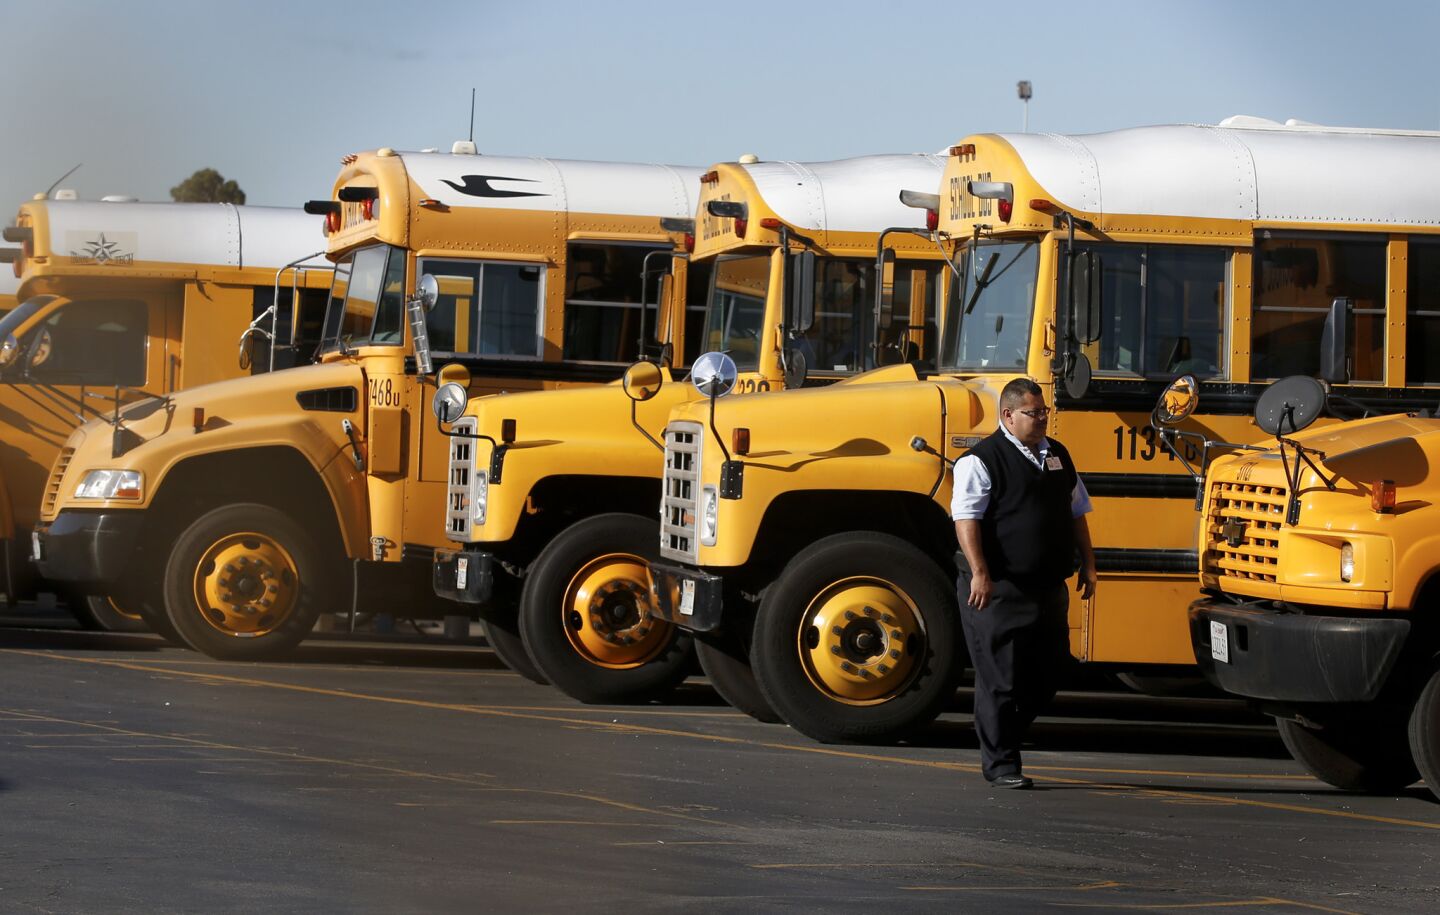 School buses are idle in the LAUSD's Gardena garage after officials closed all campuses in the district following a "credible threat' of violence on Dec. 15.